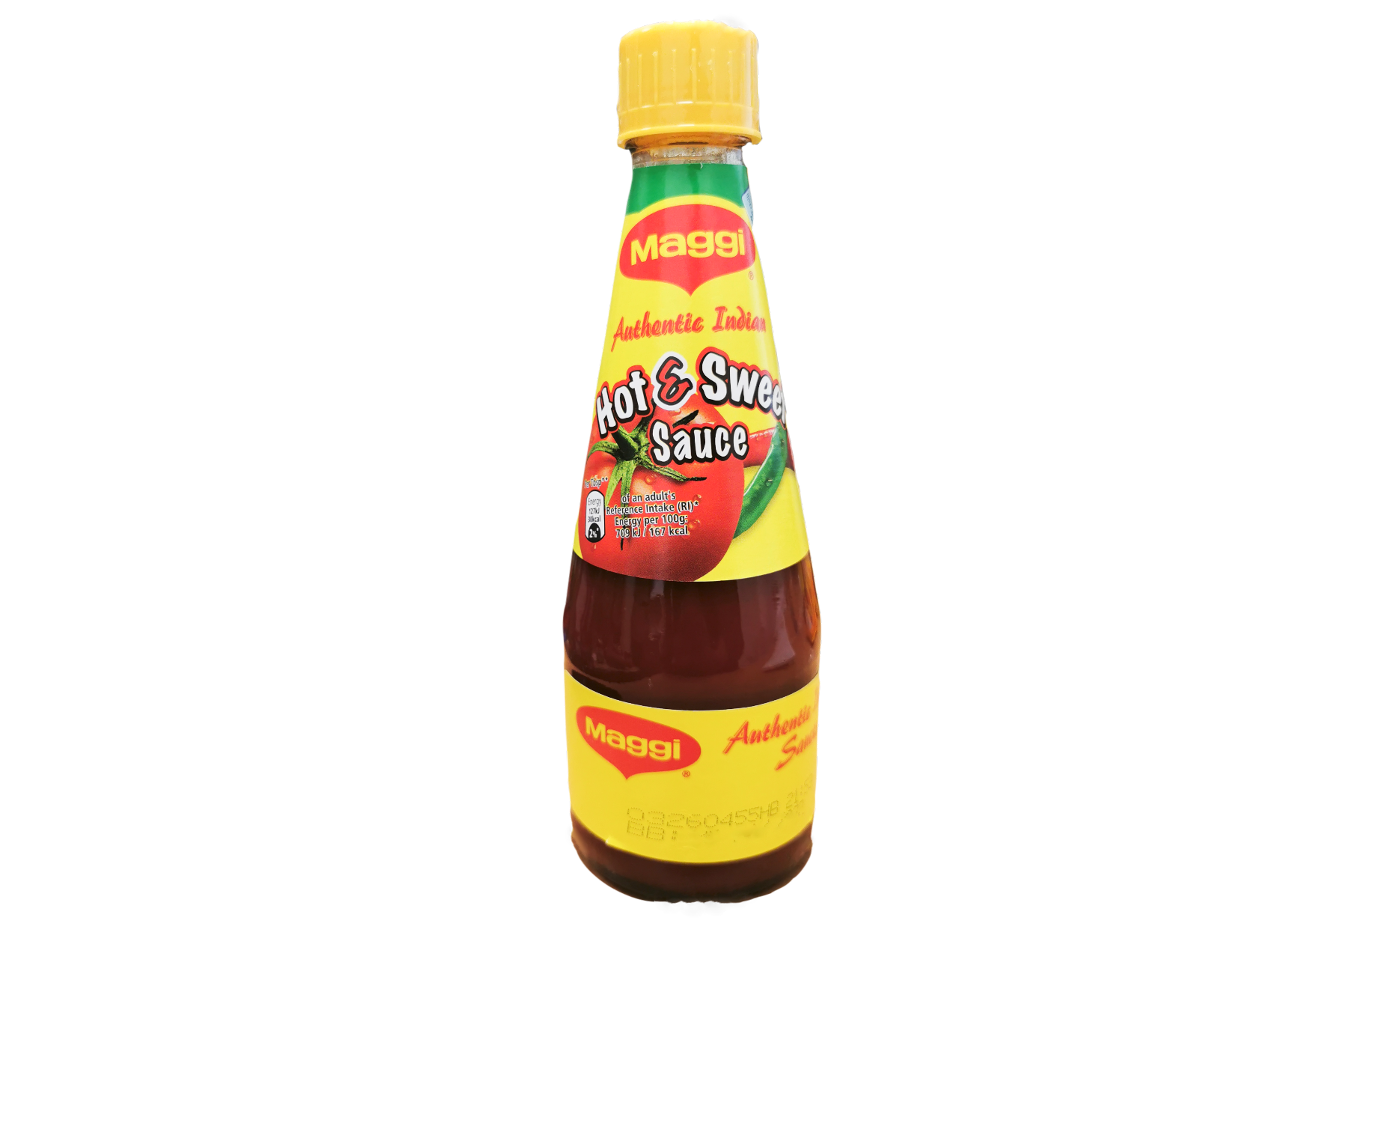 Maggi Hot N Sweet Sauce (Authentic Indian)